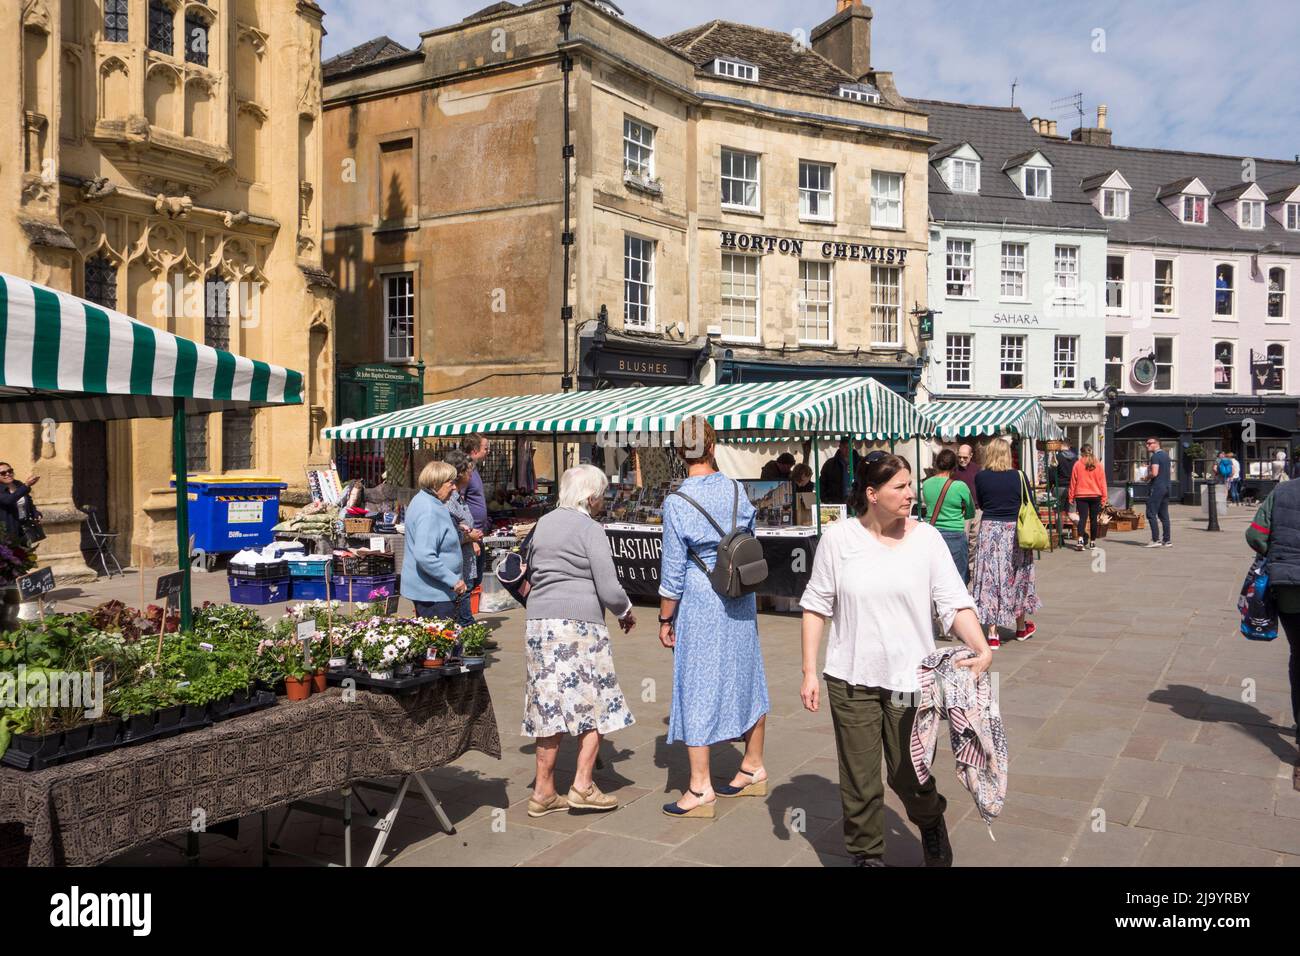 Shoppers at Saturday outdoor market in Market Place, Cirencester, Gloucestershire, UK Stock Photo